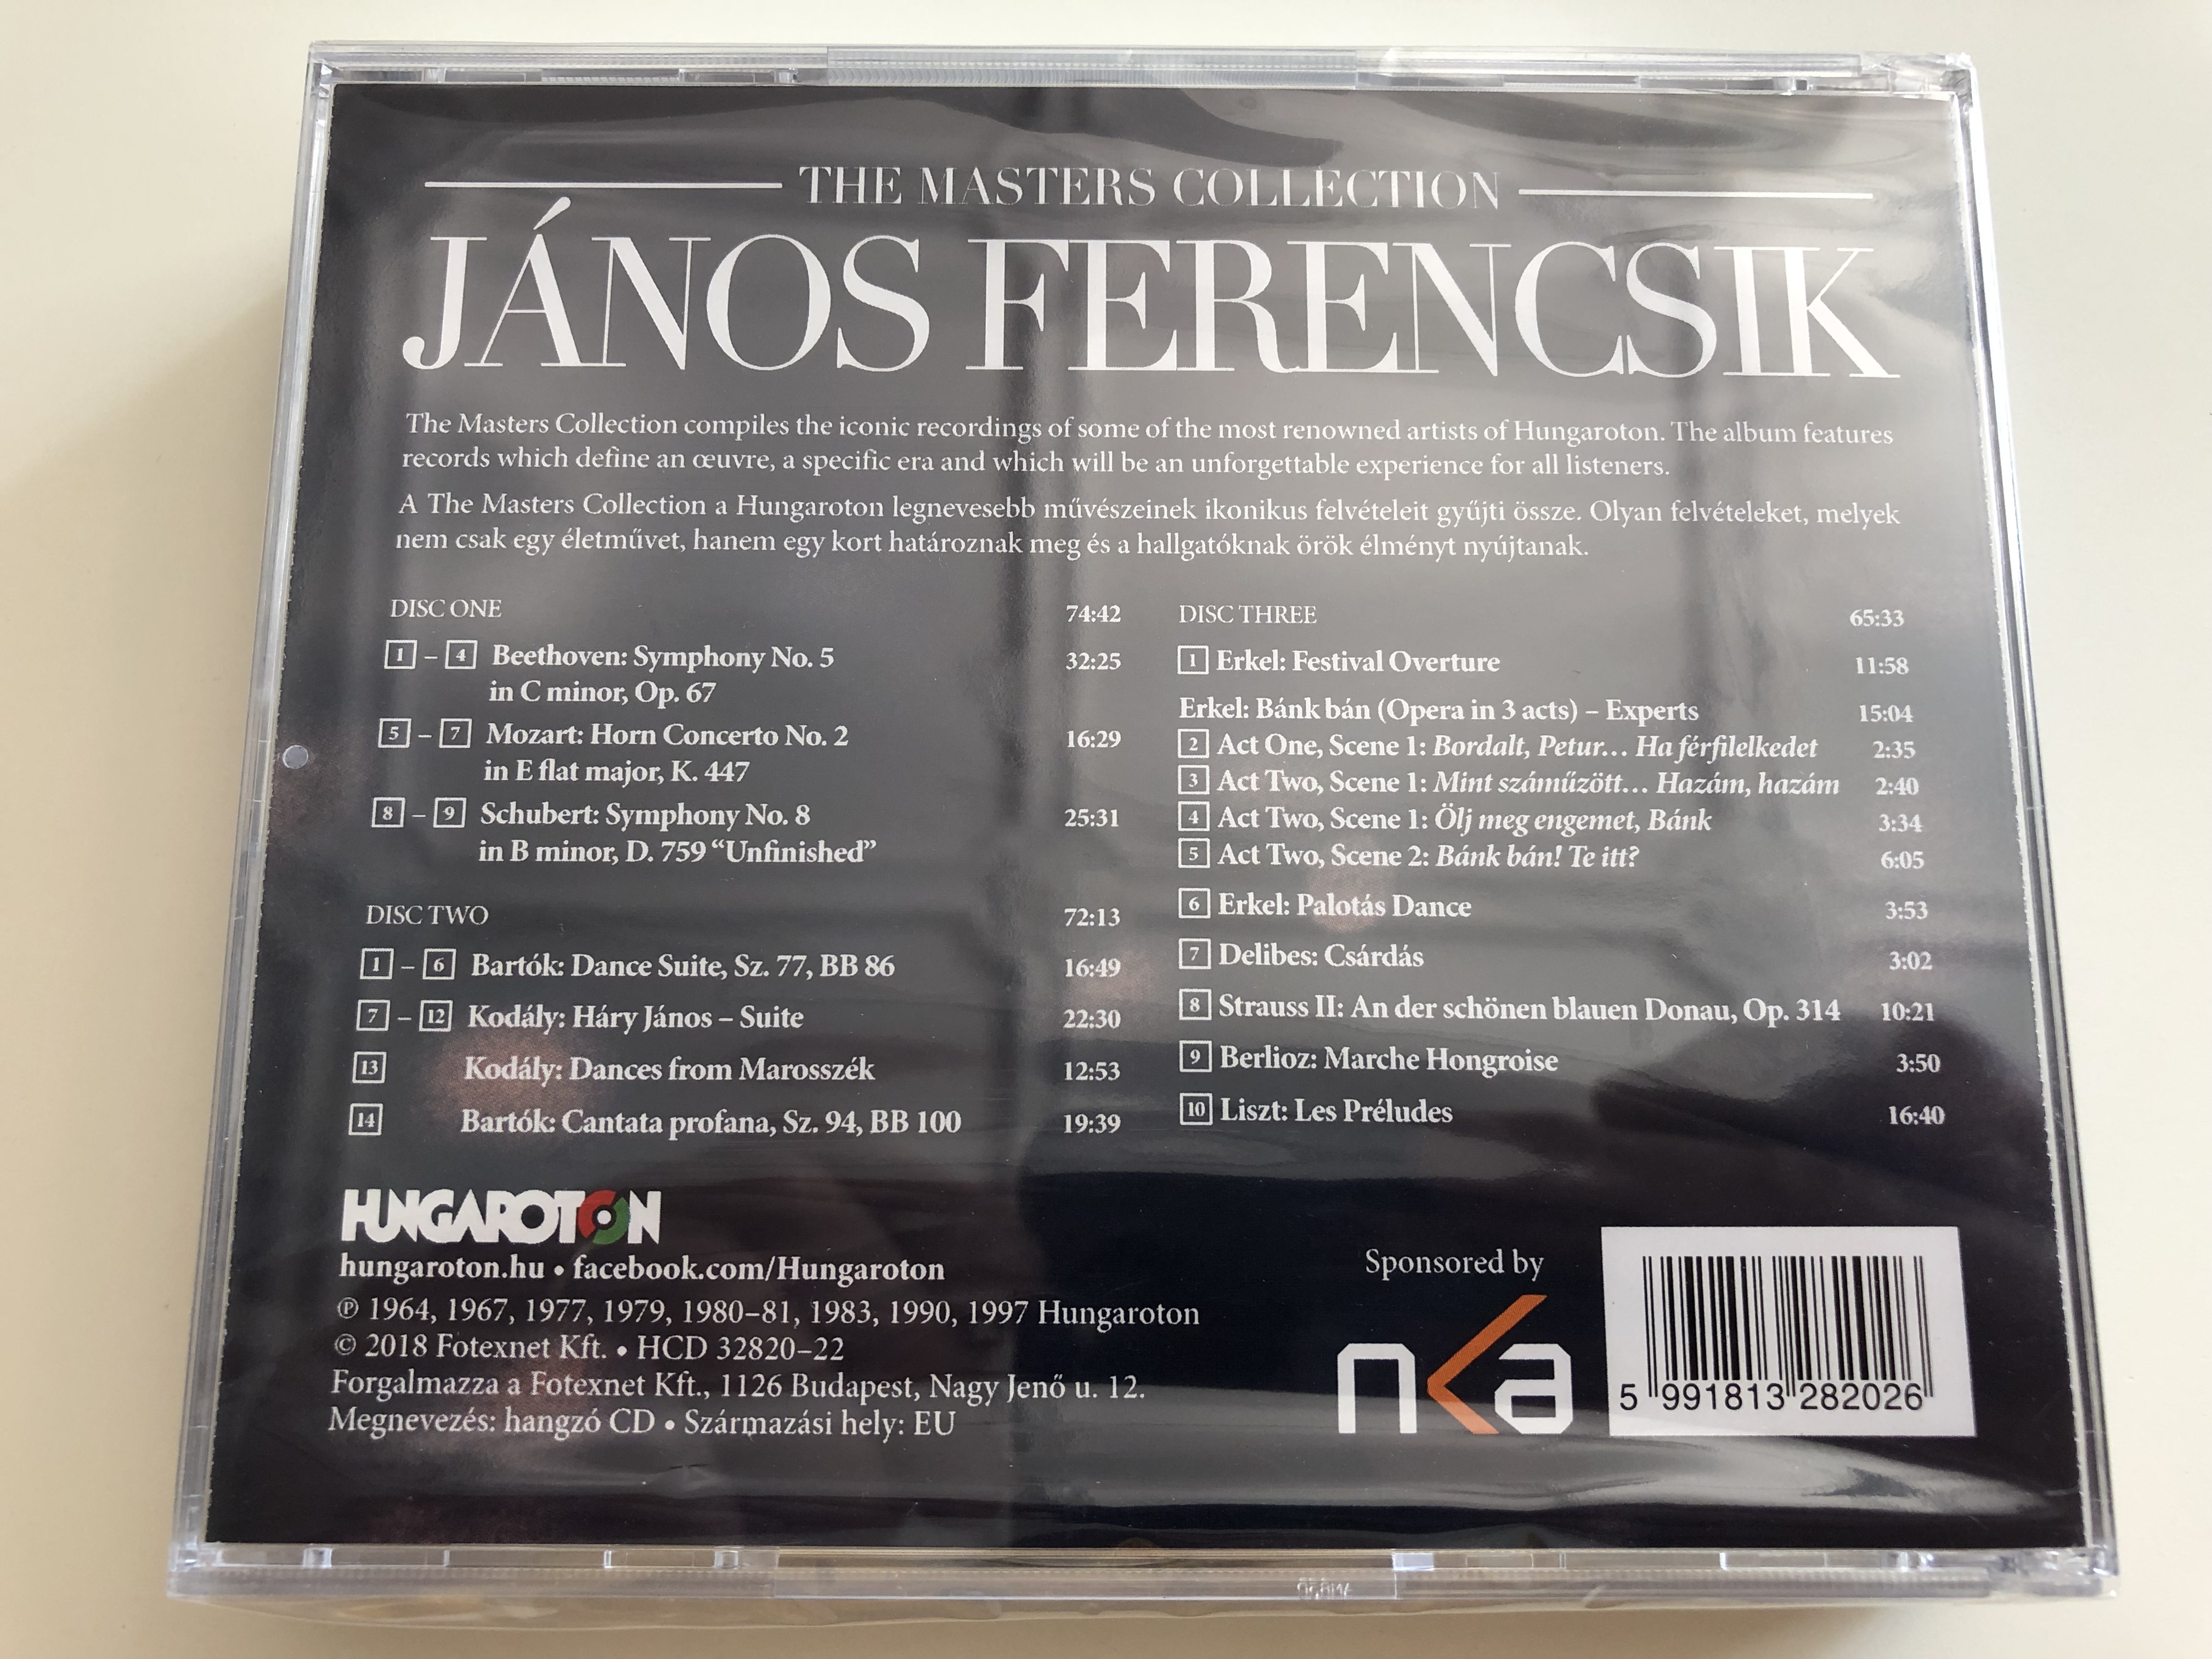 the-masters-collection-j-nos-ferencsik-iconic-recordings-of-the-most-renowned-artists-of-hungaroton-hcd-32820-22-3-cd-set-3-.jpg